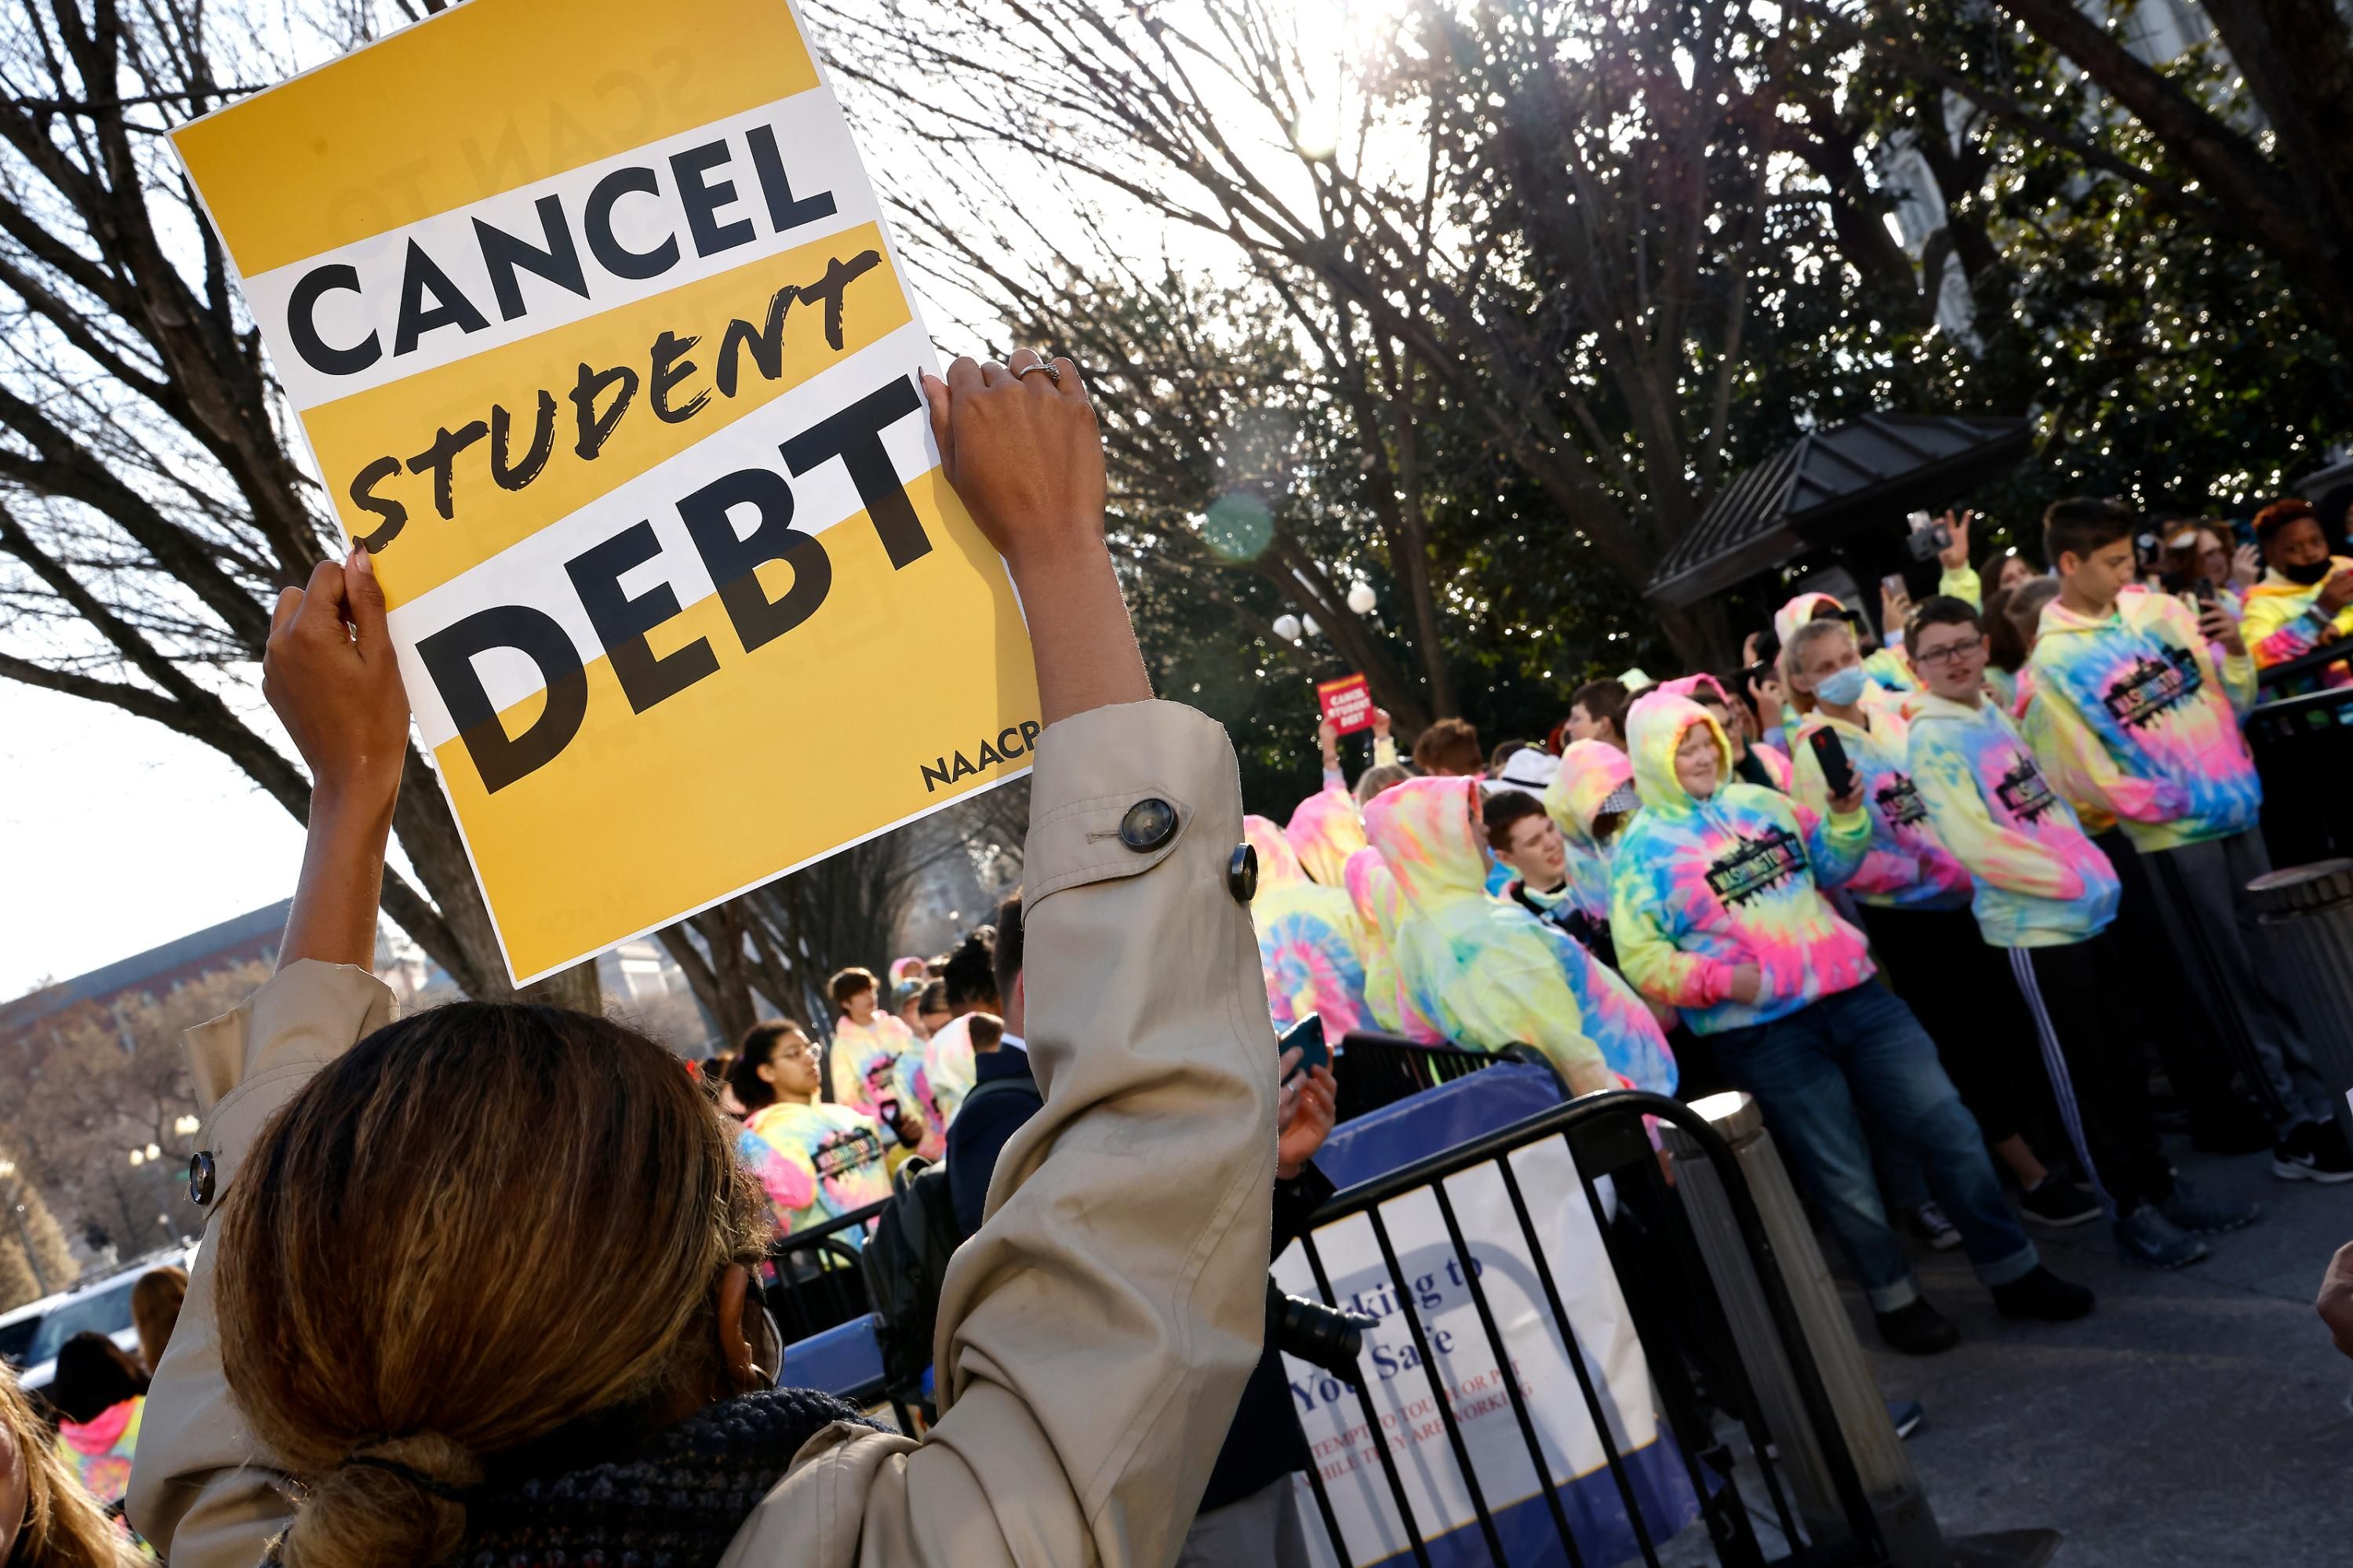 Activists rally in support of student debt cancellation